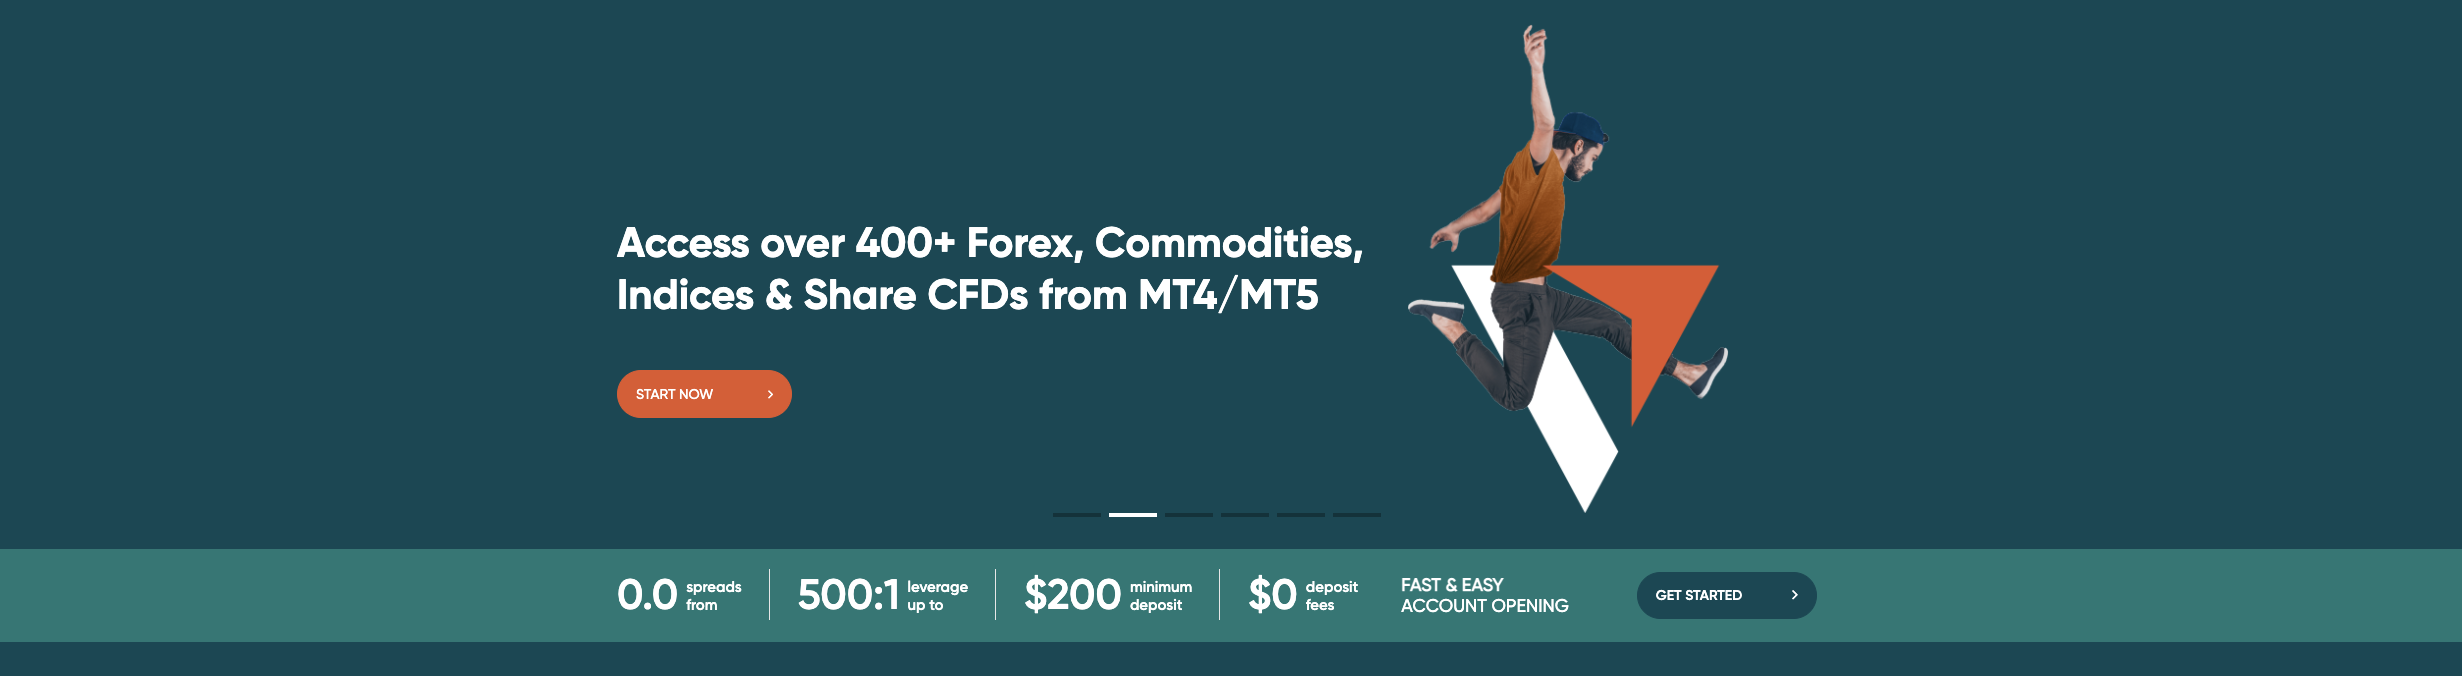 The official website of the forex broker Vantage Markets